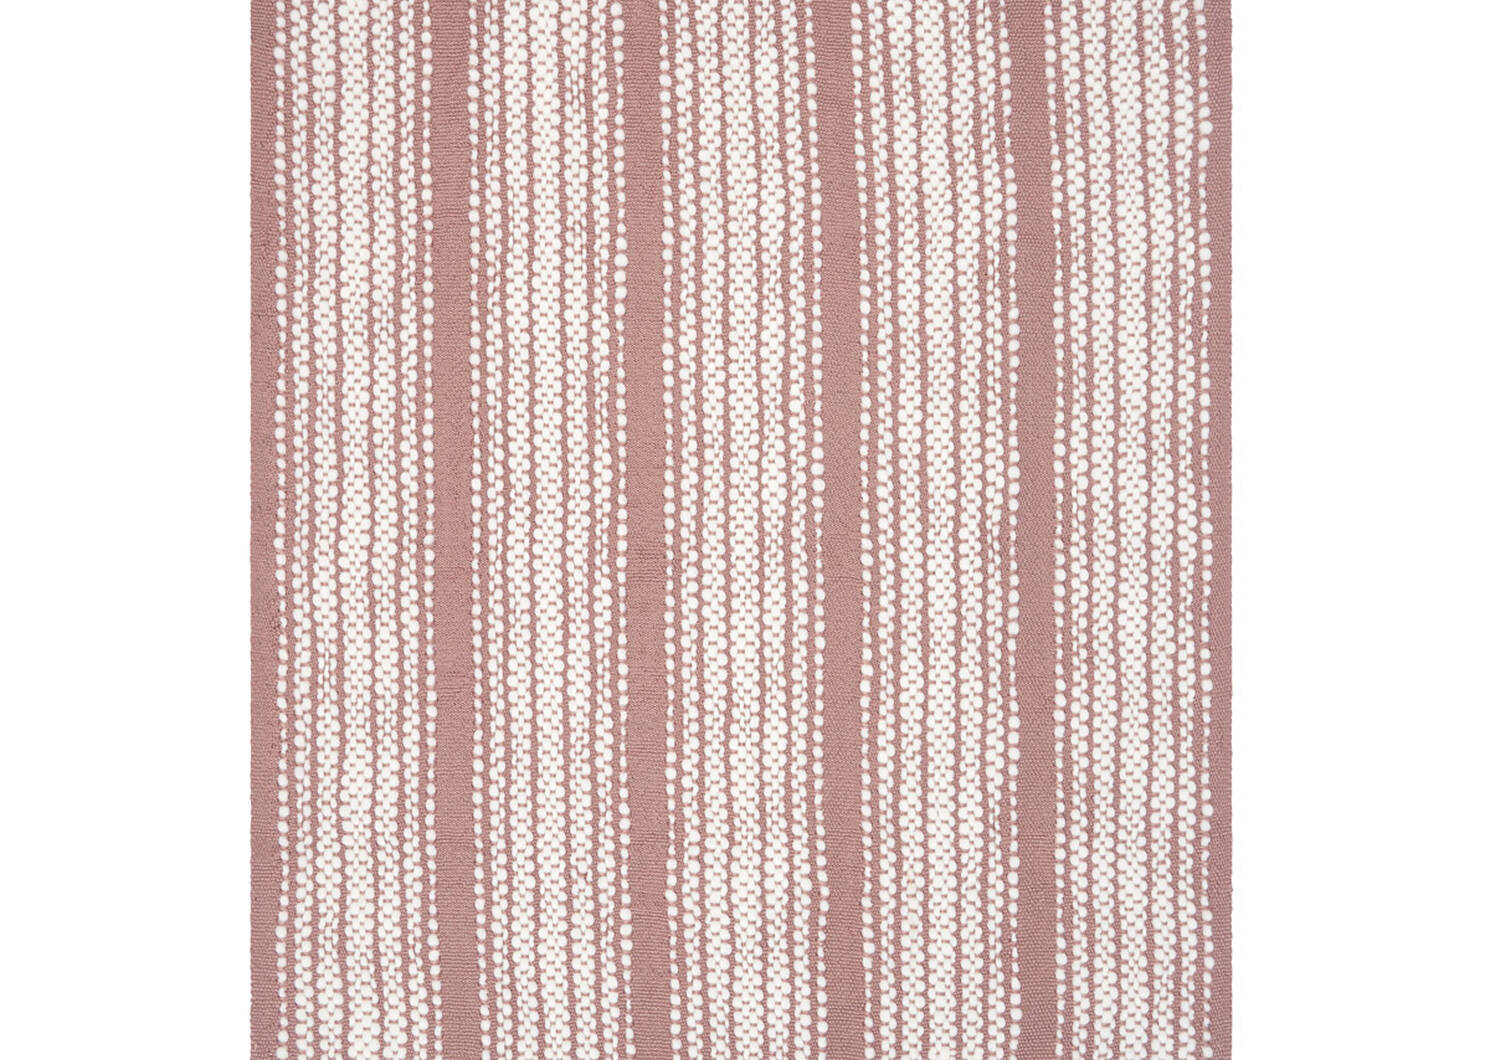 Nicaila Throw Ballet Pink/Ivory